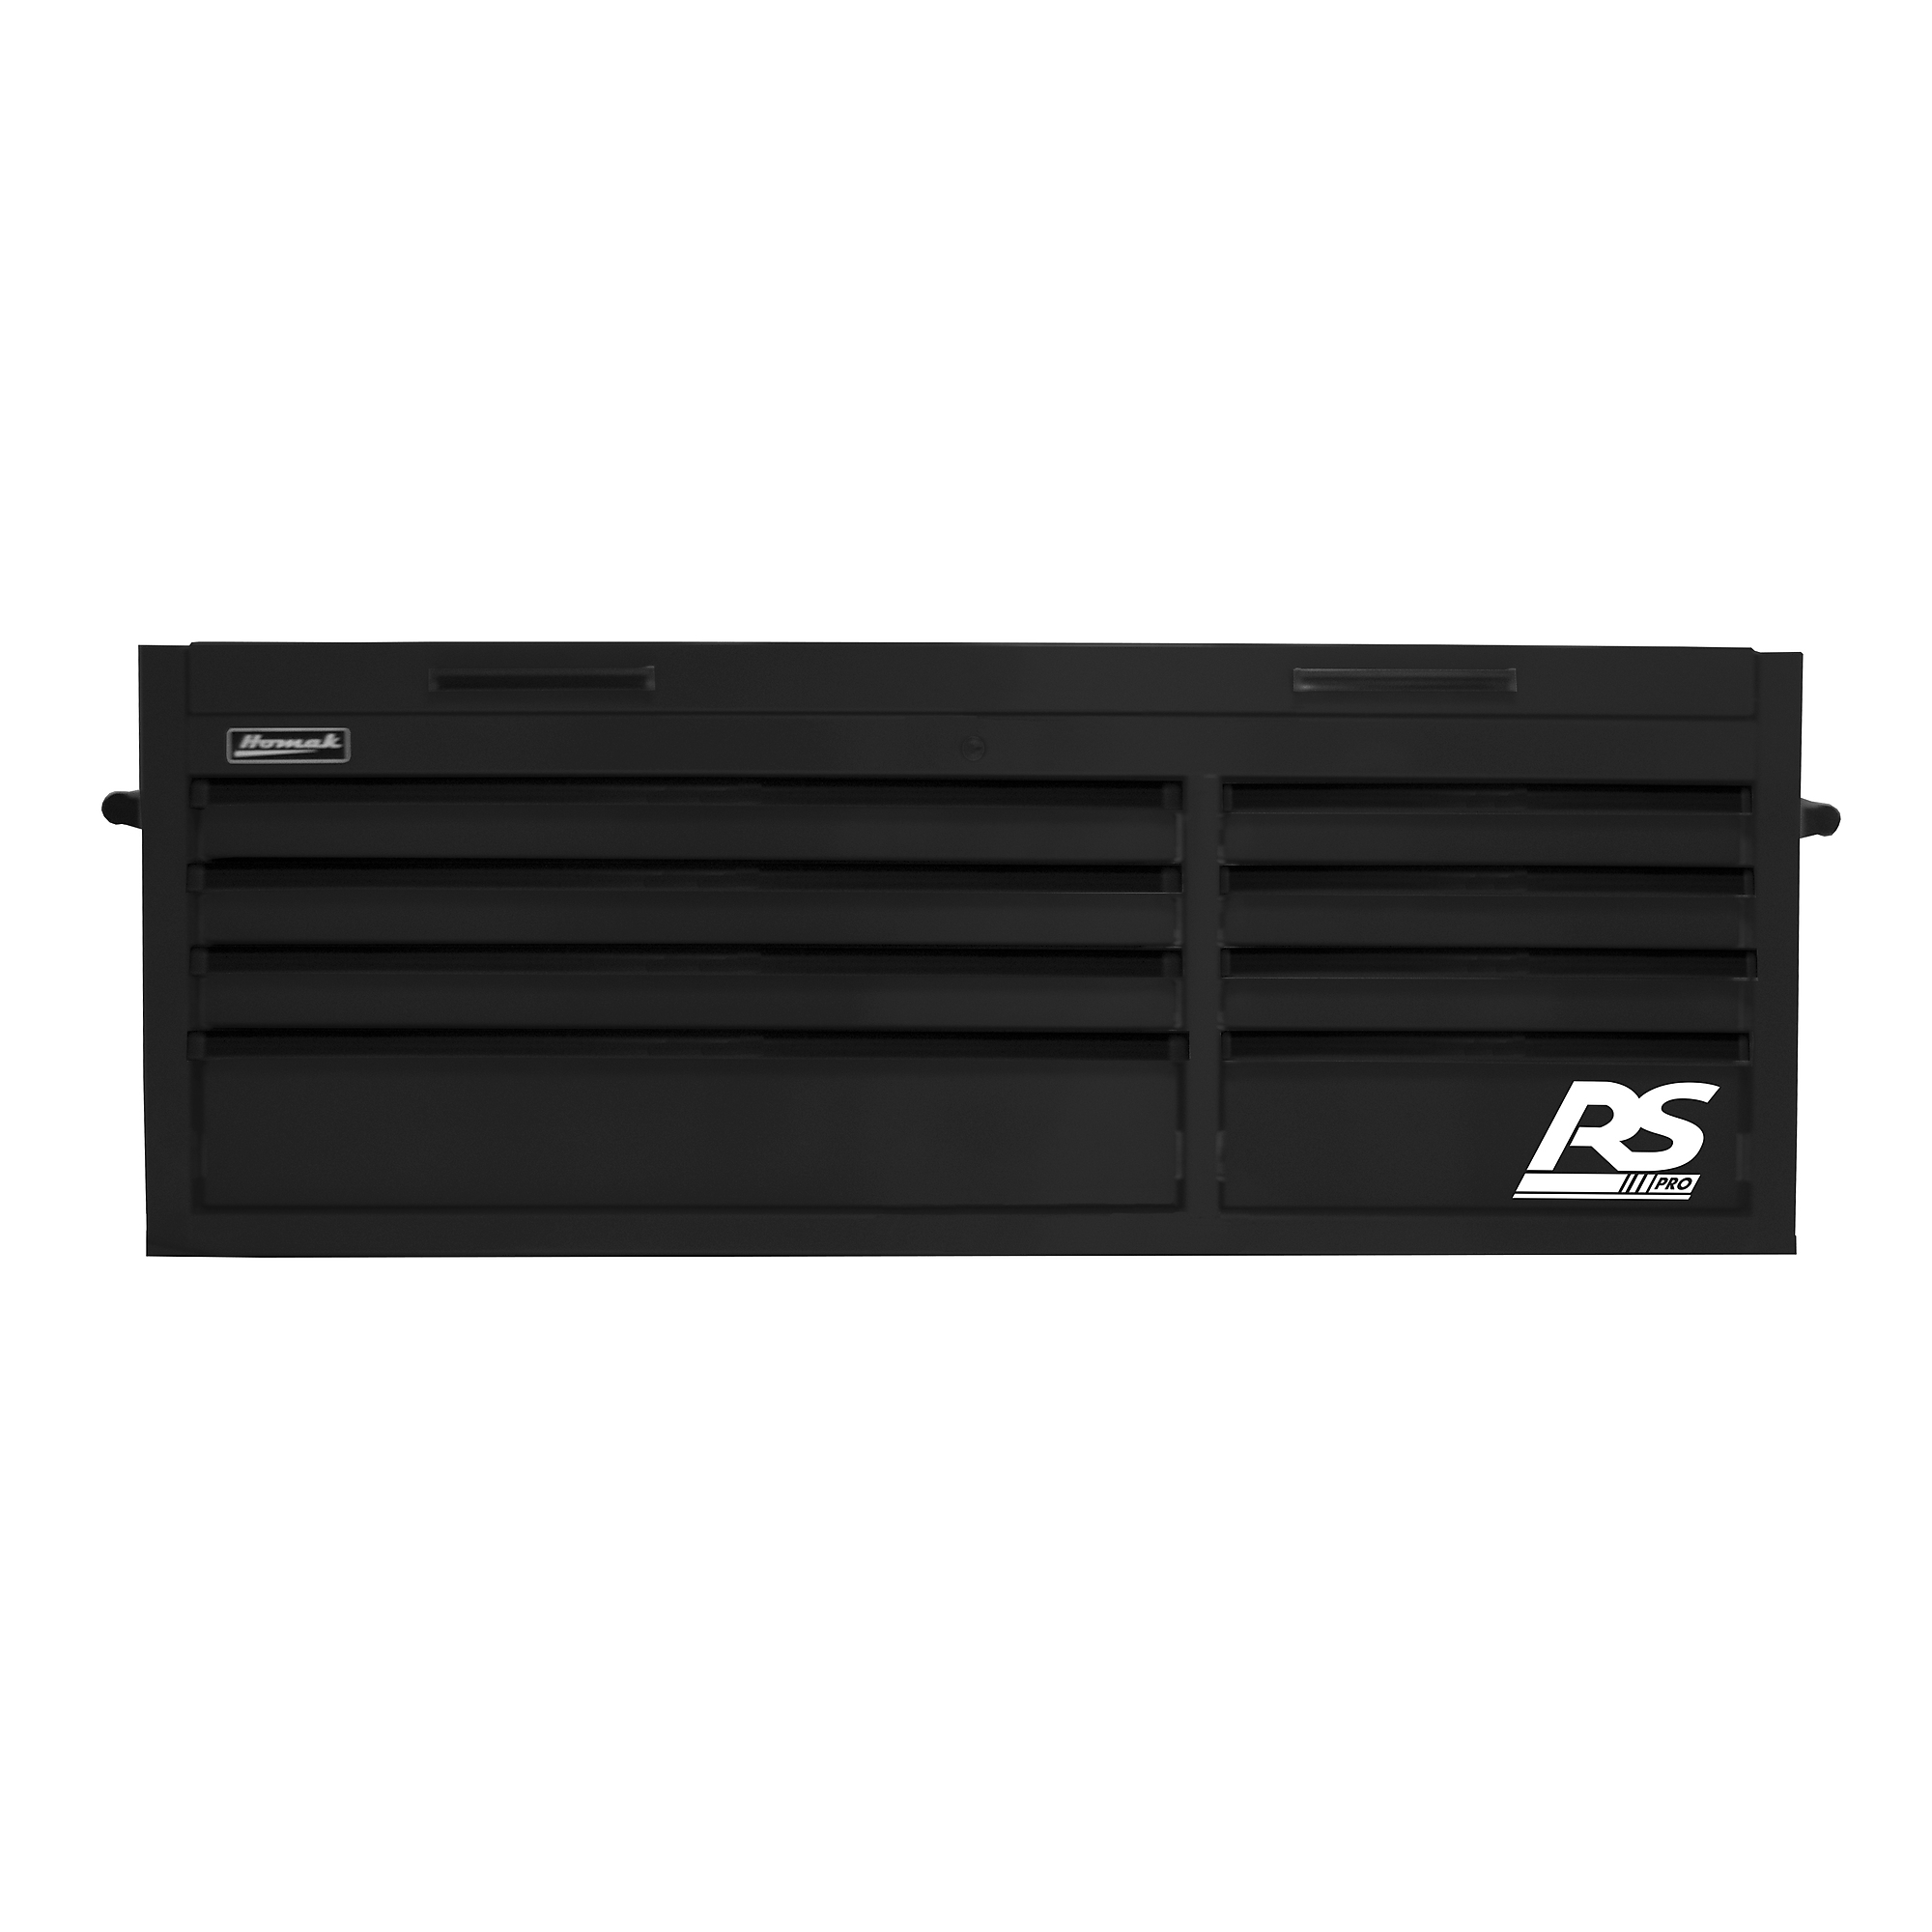 Homak RS Pro, 54Inch RS PRO 8 DWR TOP CHEST WITH OUTLET-BLACK, Width 54 in, Height 21.375 in, Color Black, Model BK02065800